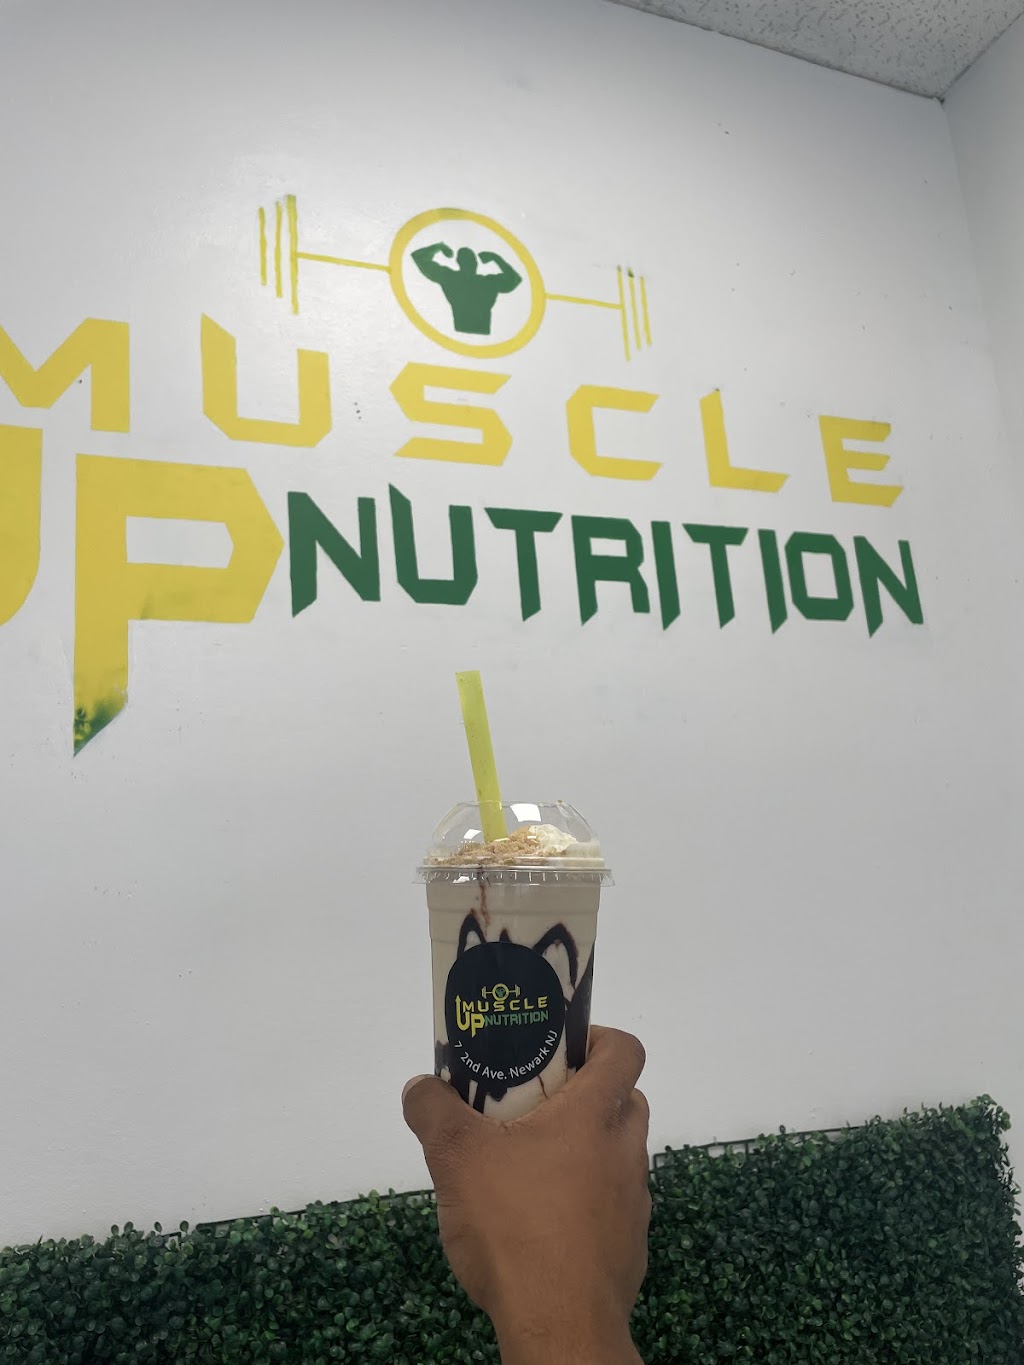 Muscle up nutrition | 7 2nd Ave, Newark, NJ 07104 | Phone: (973) 688-8177